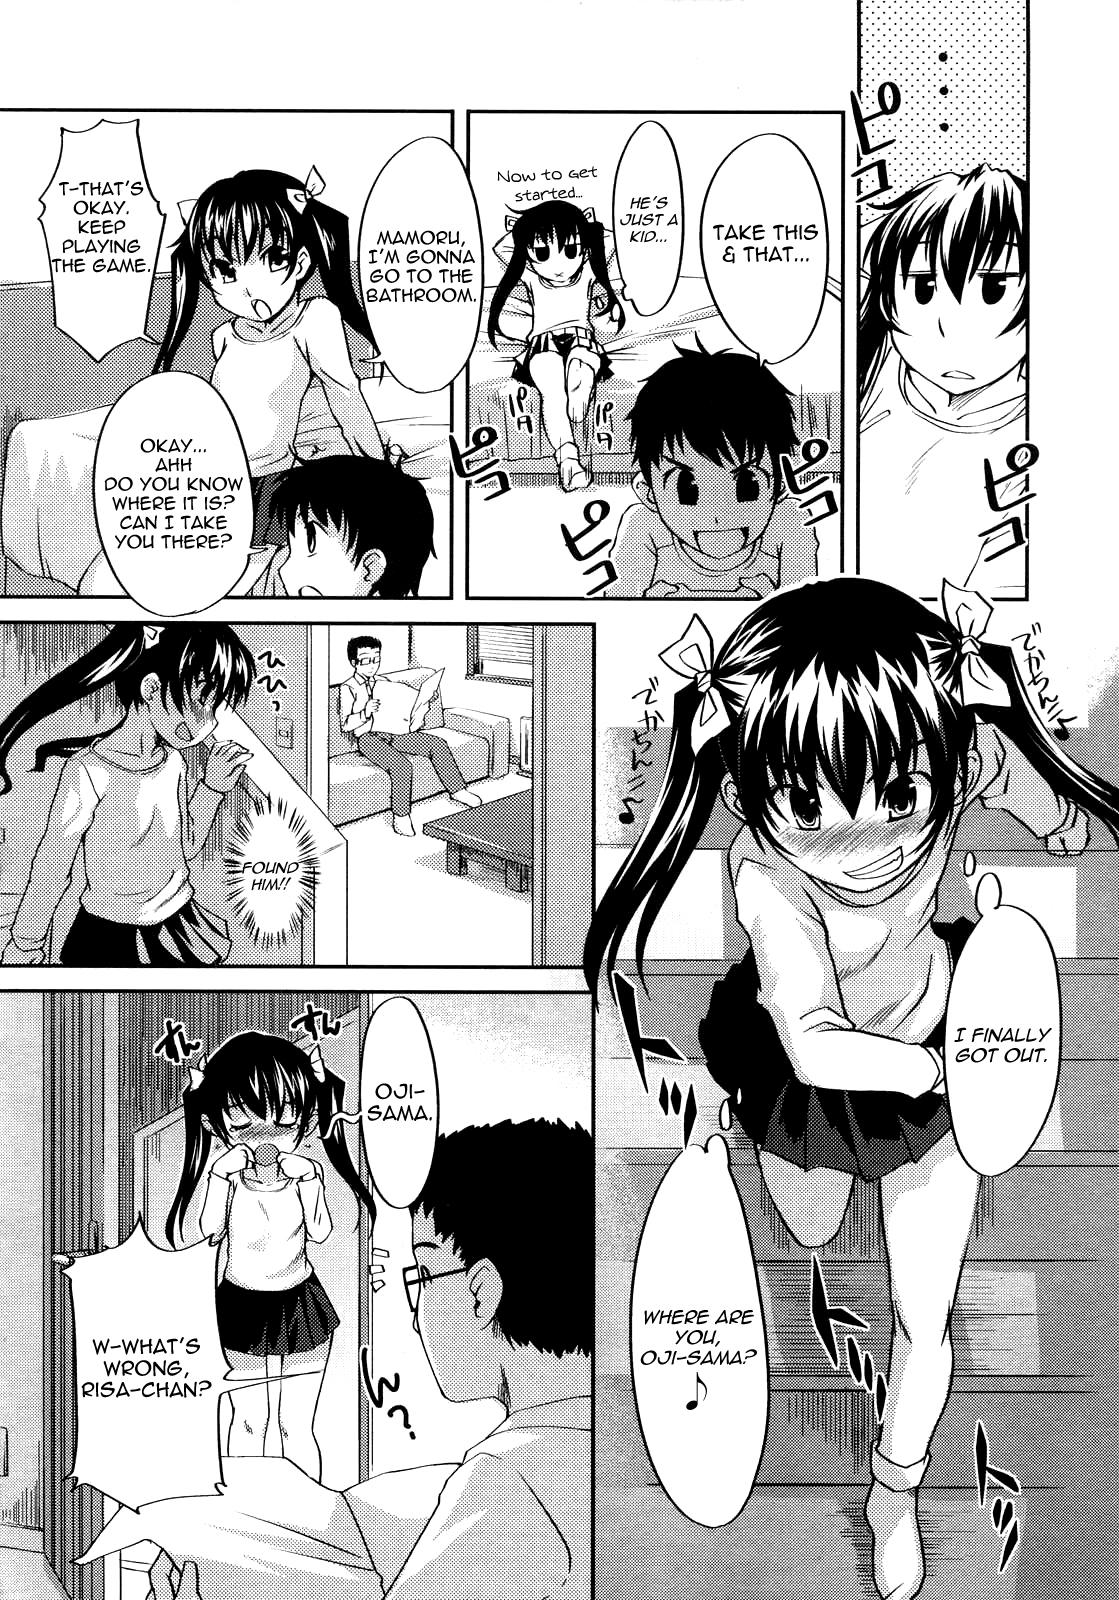 Making Love Porn Otona No Jouken | Requirements of an Adult Glam - Page 9